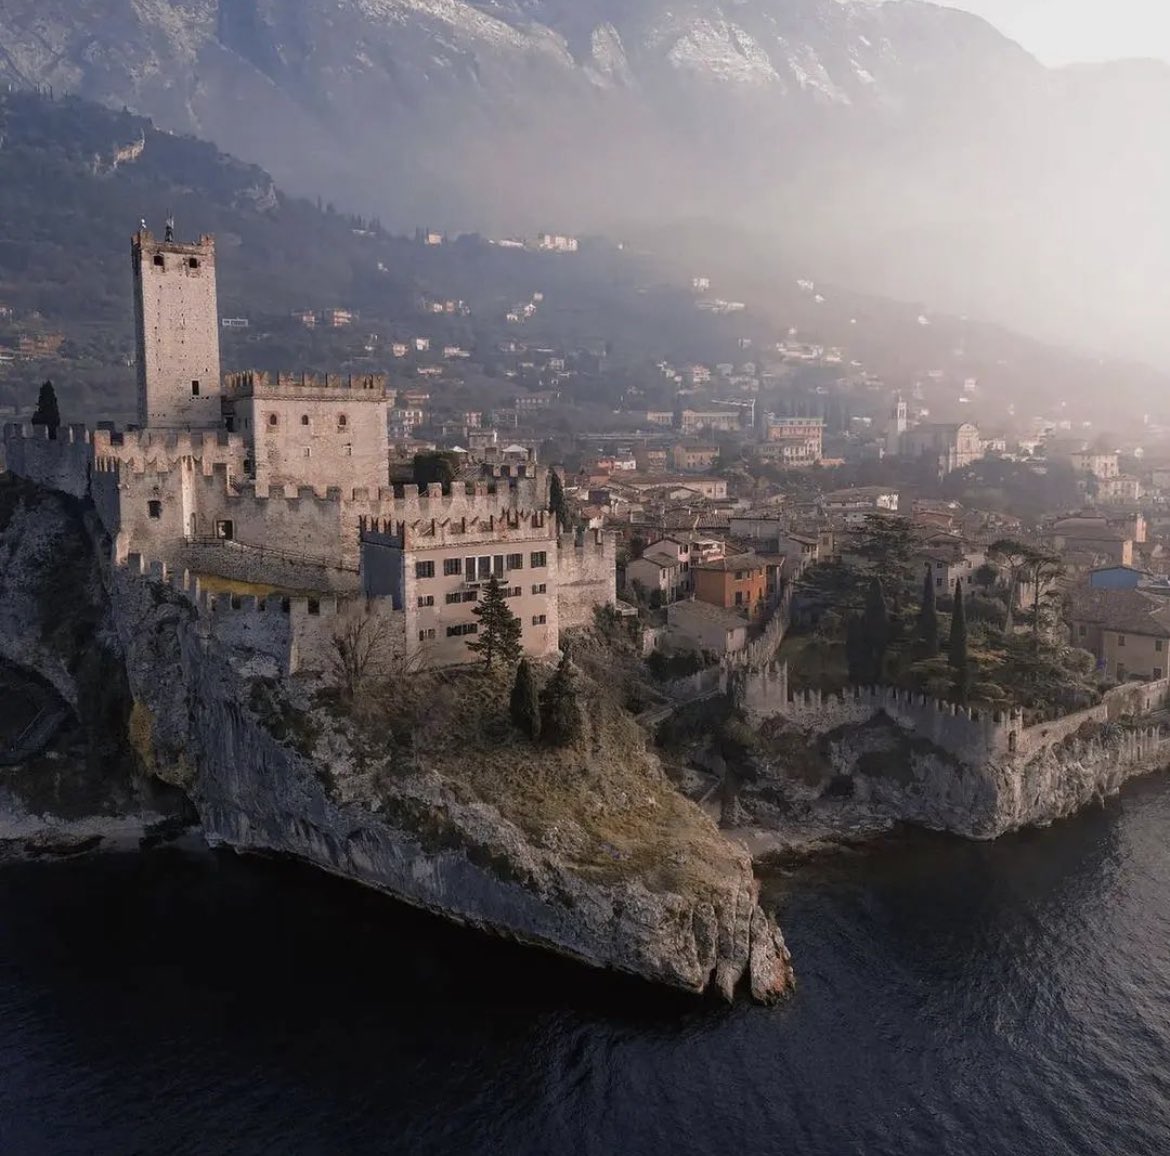 The Scaliger Castle of Malcesine, Italy